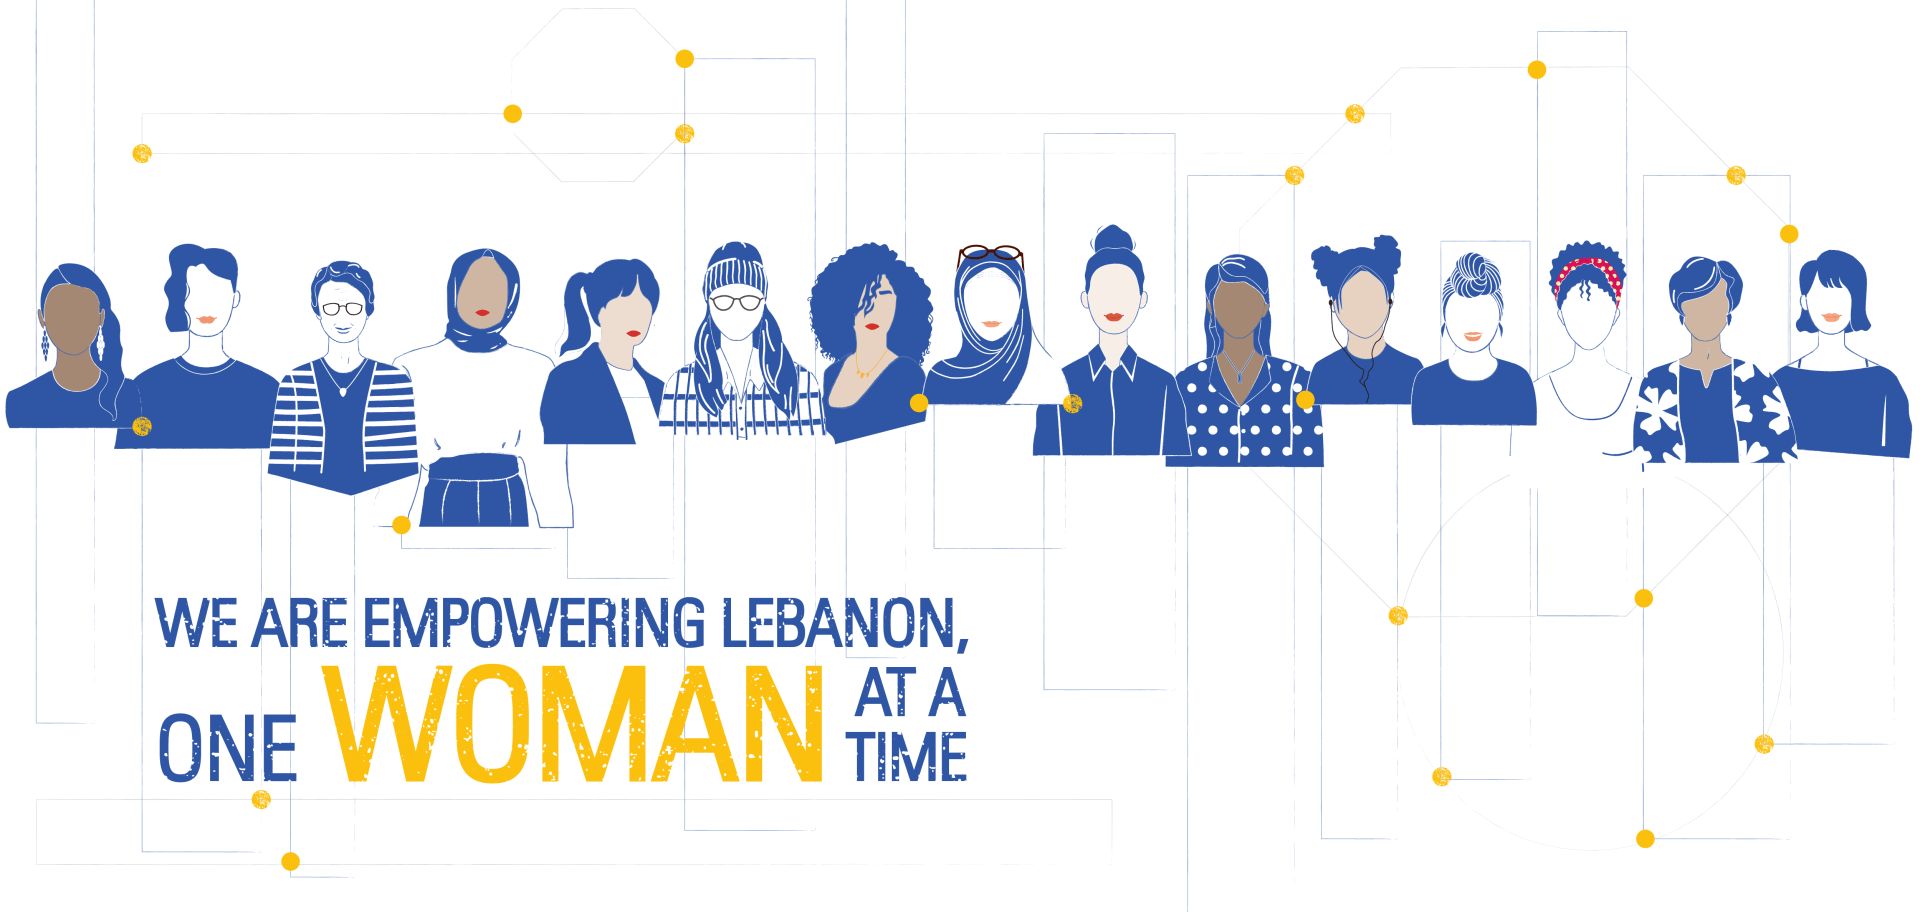 Representation of empowered women from different ethnic backgrounds in Lebanon